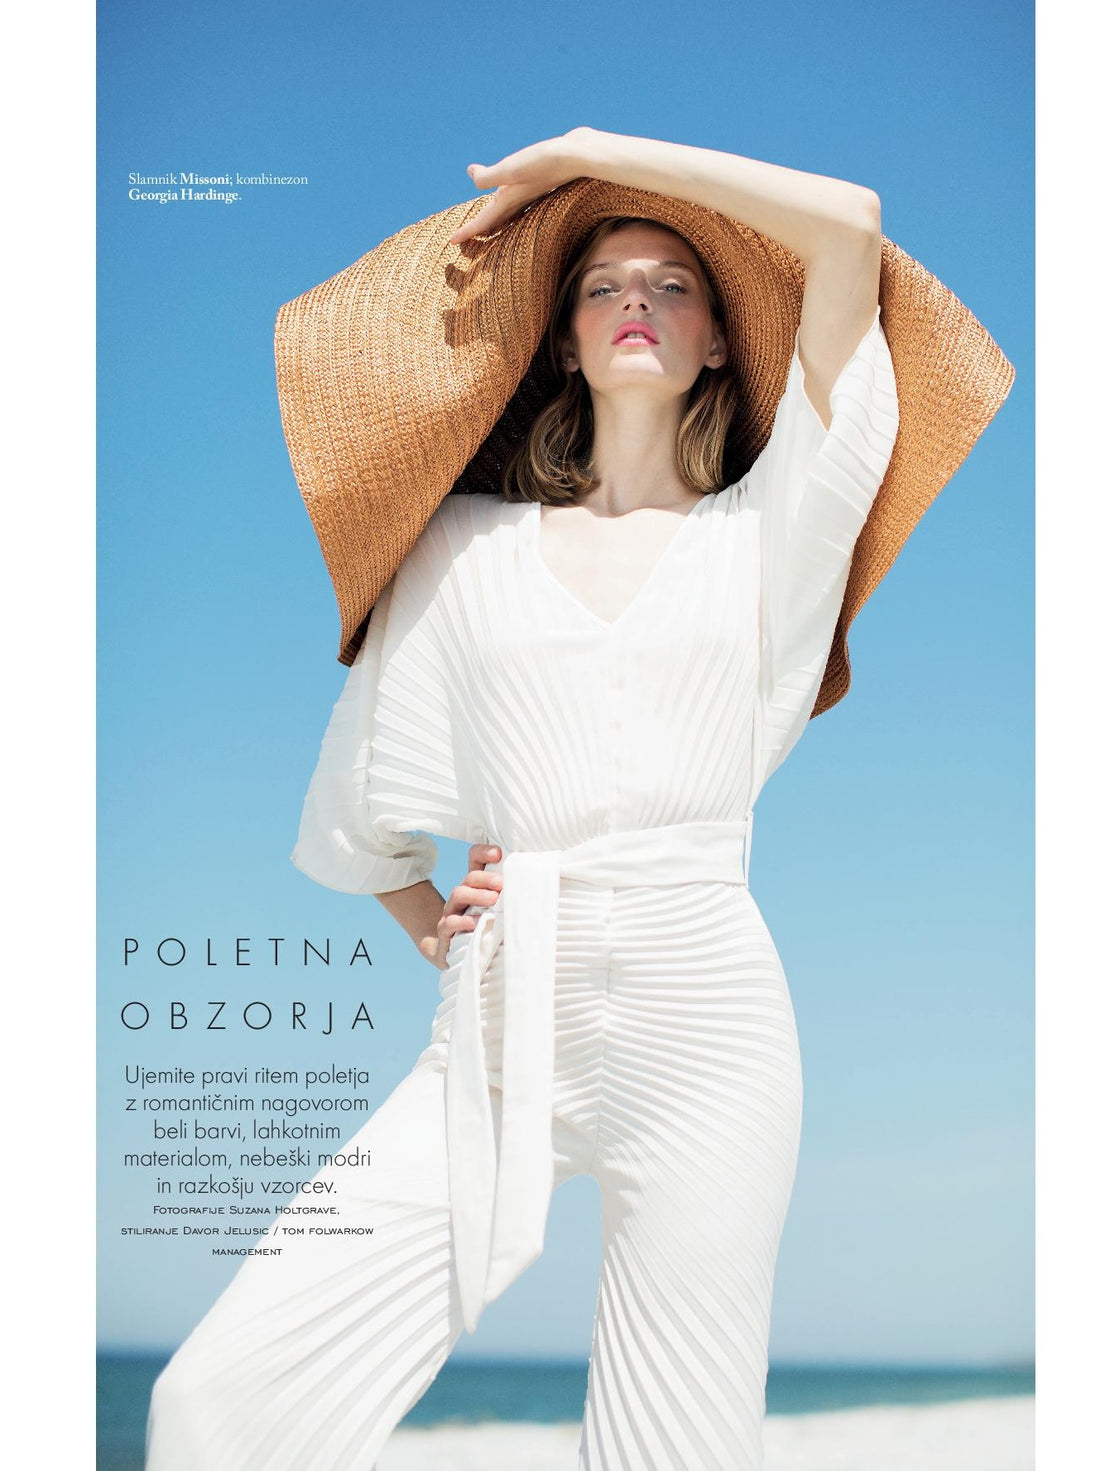 SS18 Tropic Jumpsuit featured by ELLE Slovenia